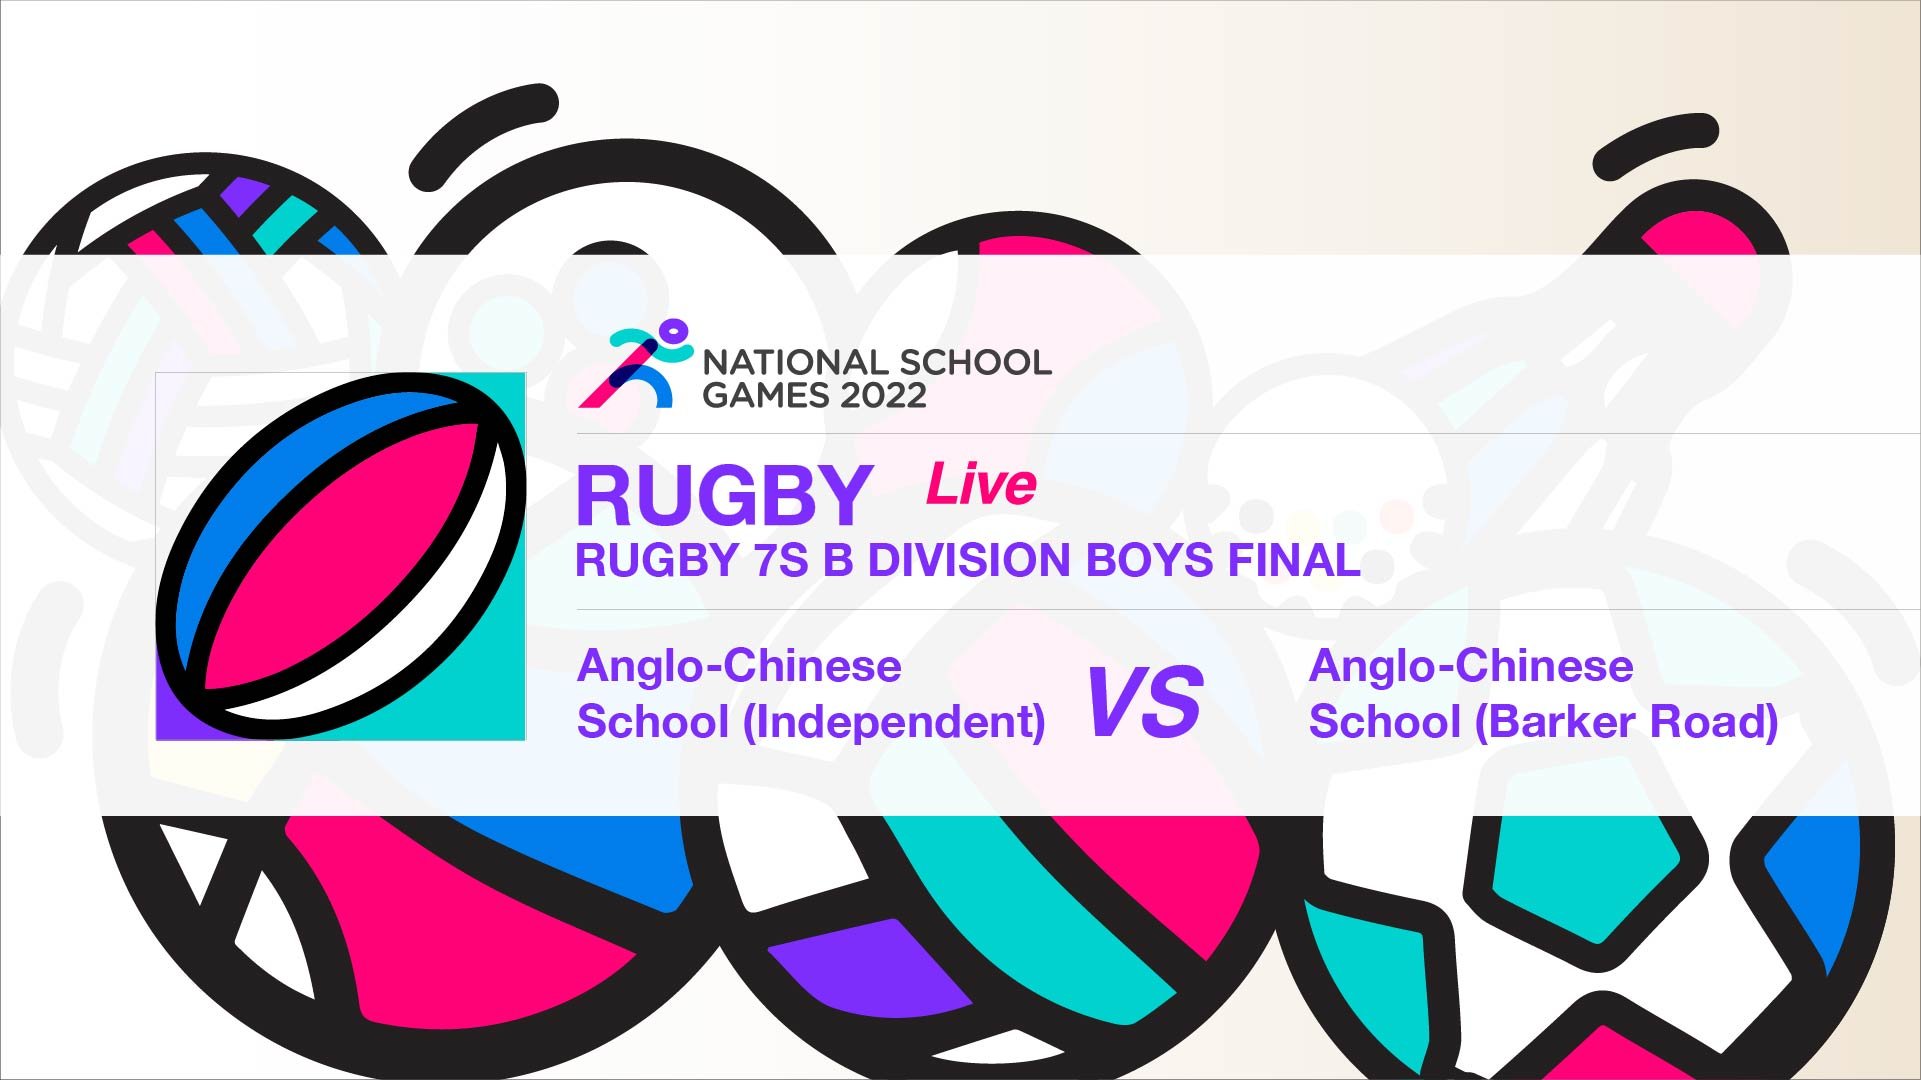 SSSC Rugby 7s B Division Boys Final | Anglo-Chinese School (Independent) vs Anglo-Chinese School (Barker Road)